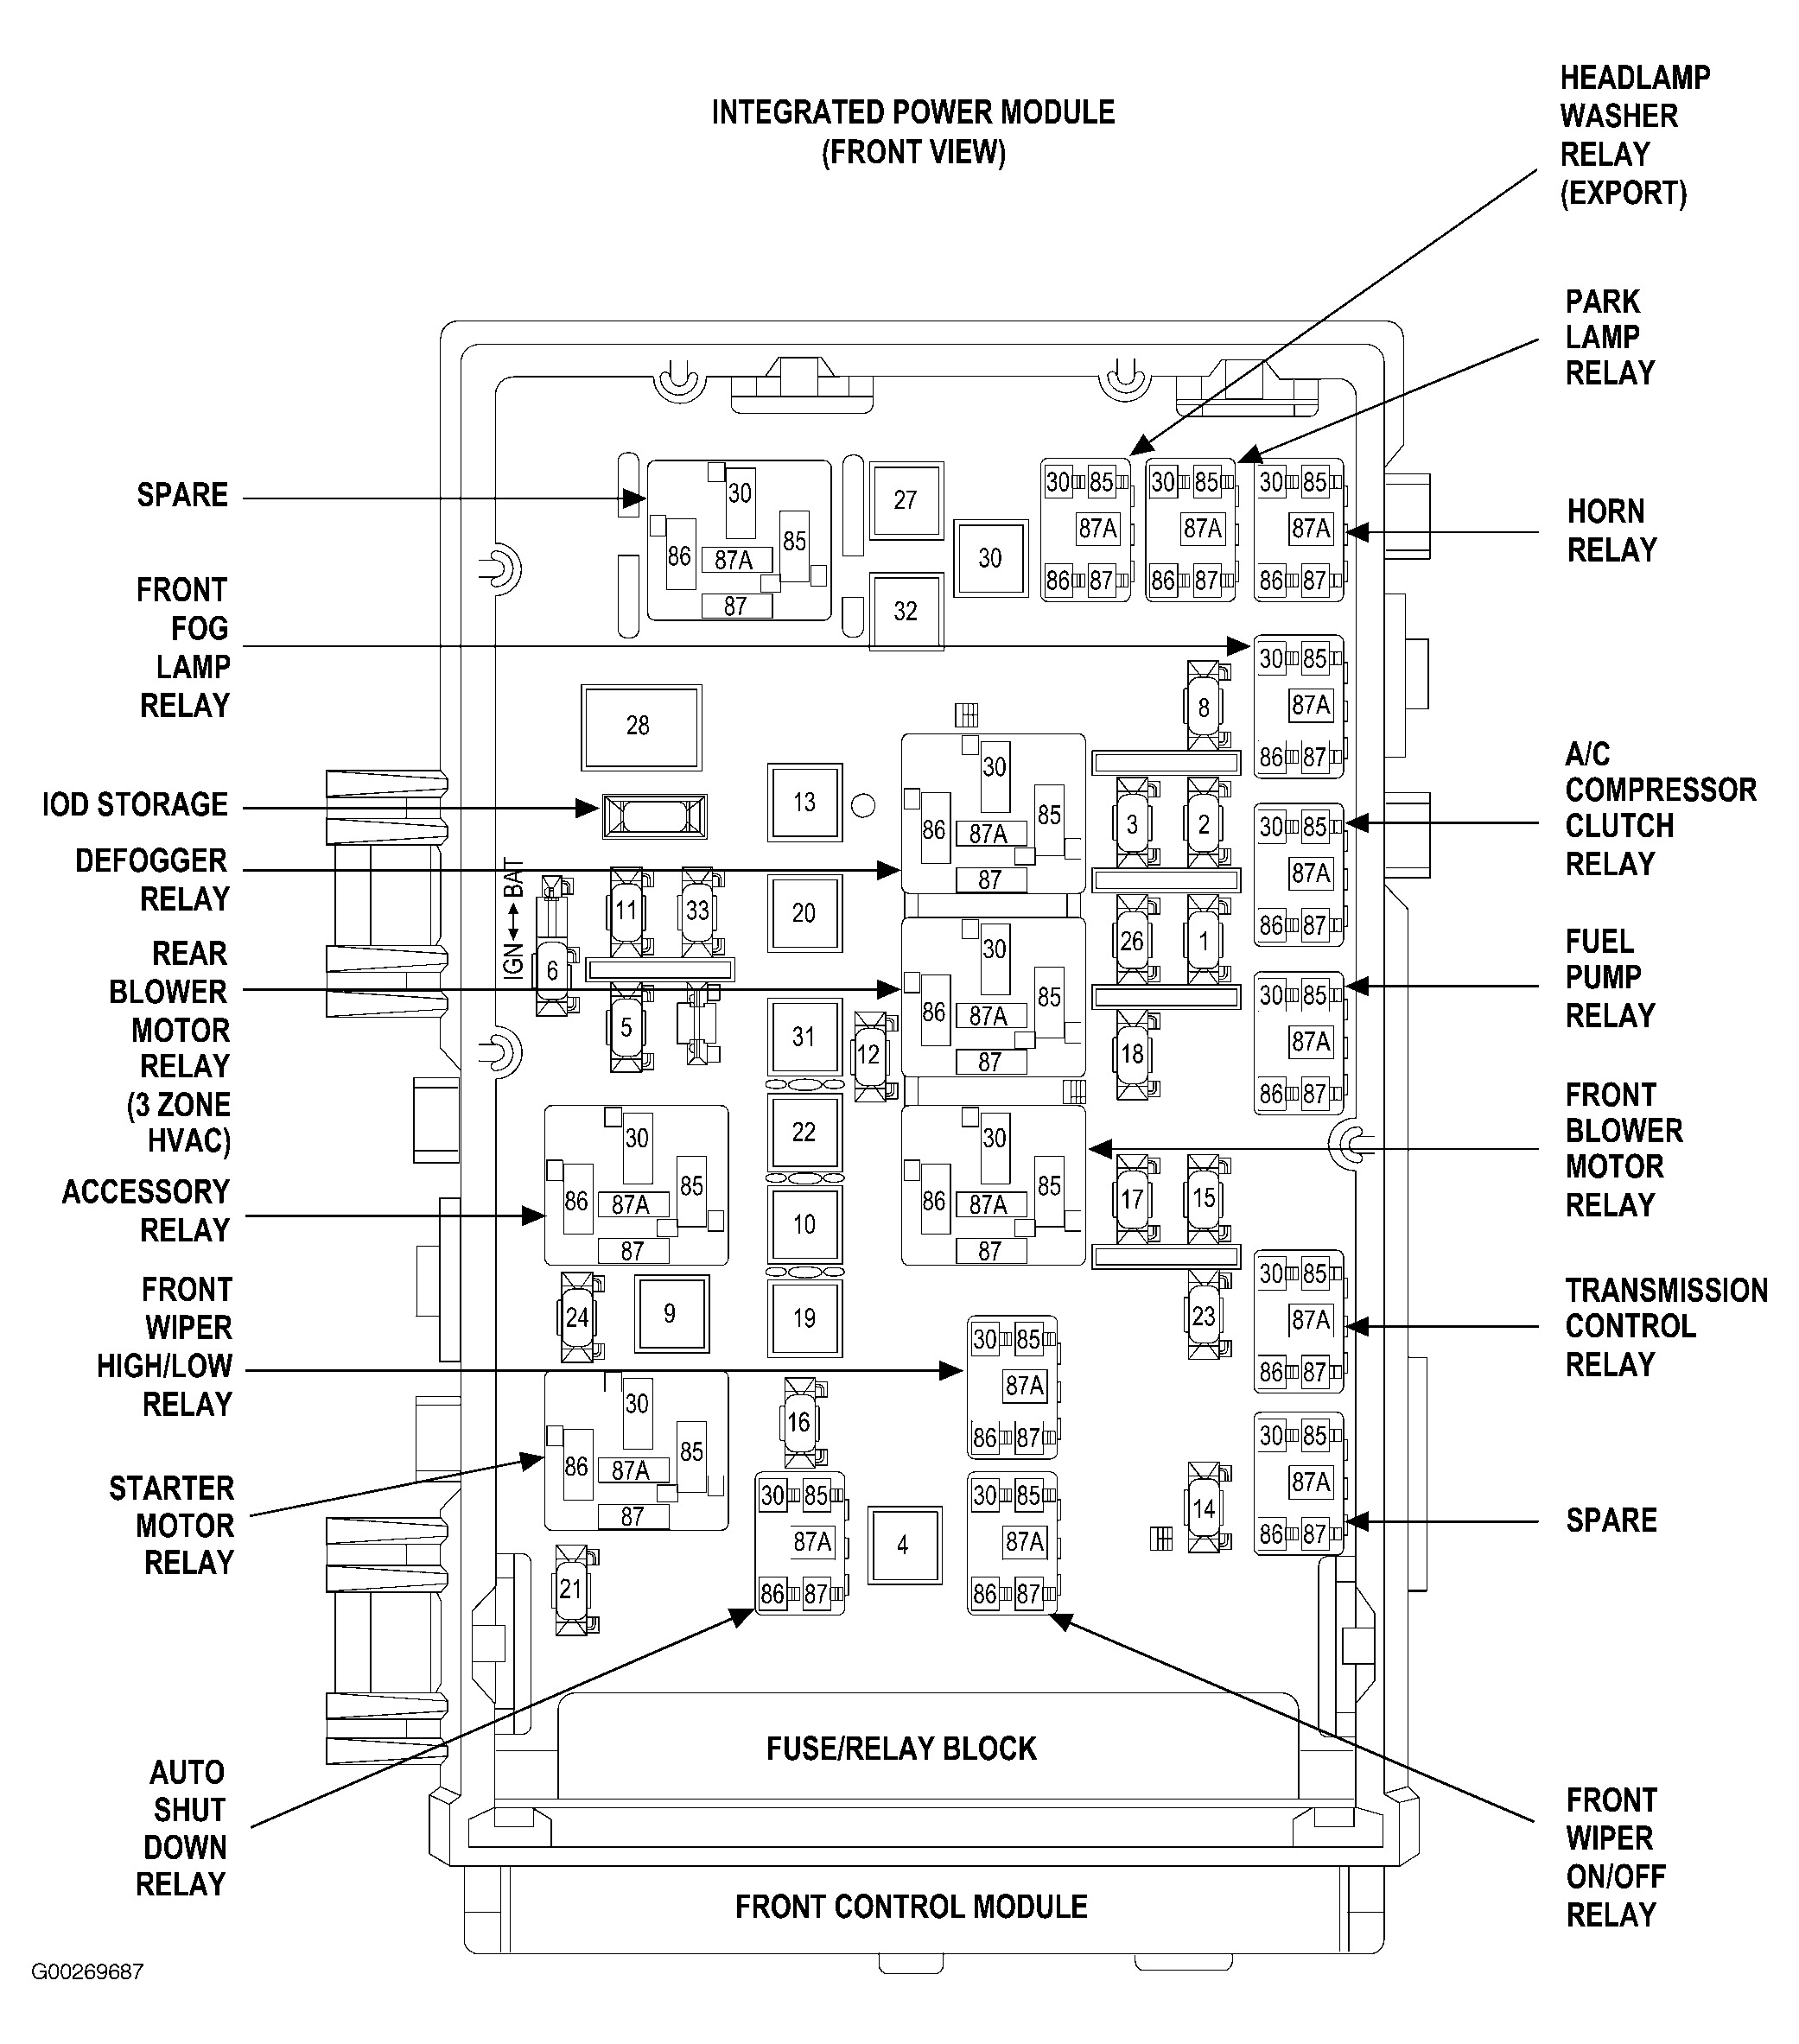 2005 Chrysler Town And Country Ignition Wiring Diagram | Manual E-Books - 2005 Chrysler Town And Country Wiring Diagram Pdf